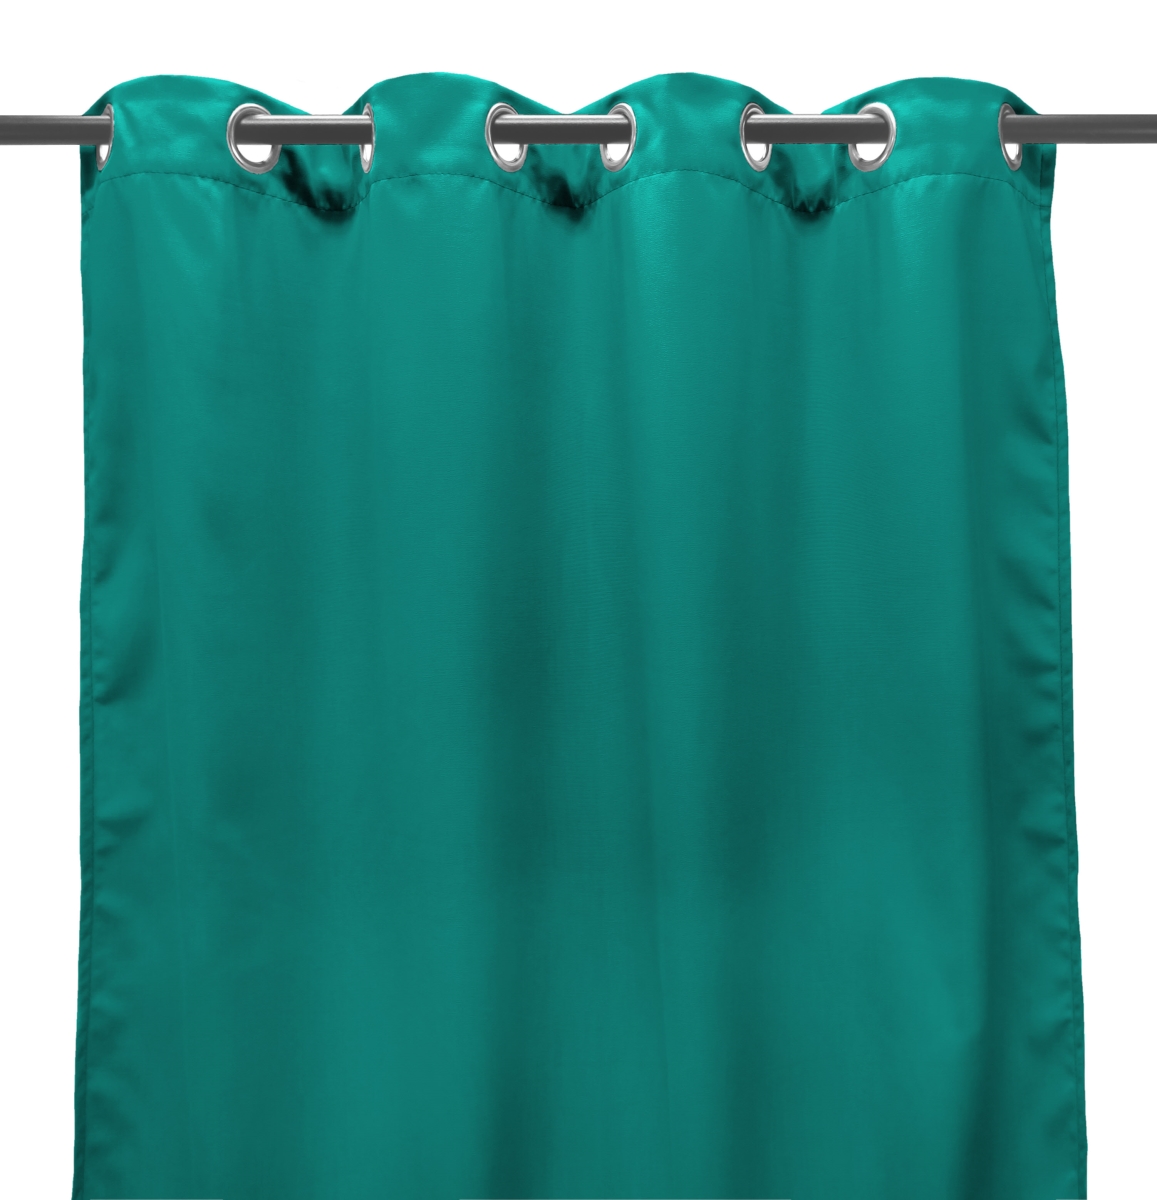 3voc5484-4333q 54 X 84 In. Outdoor Curtain Panel In Teal